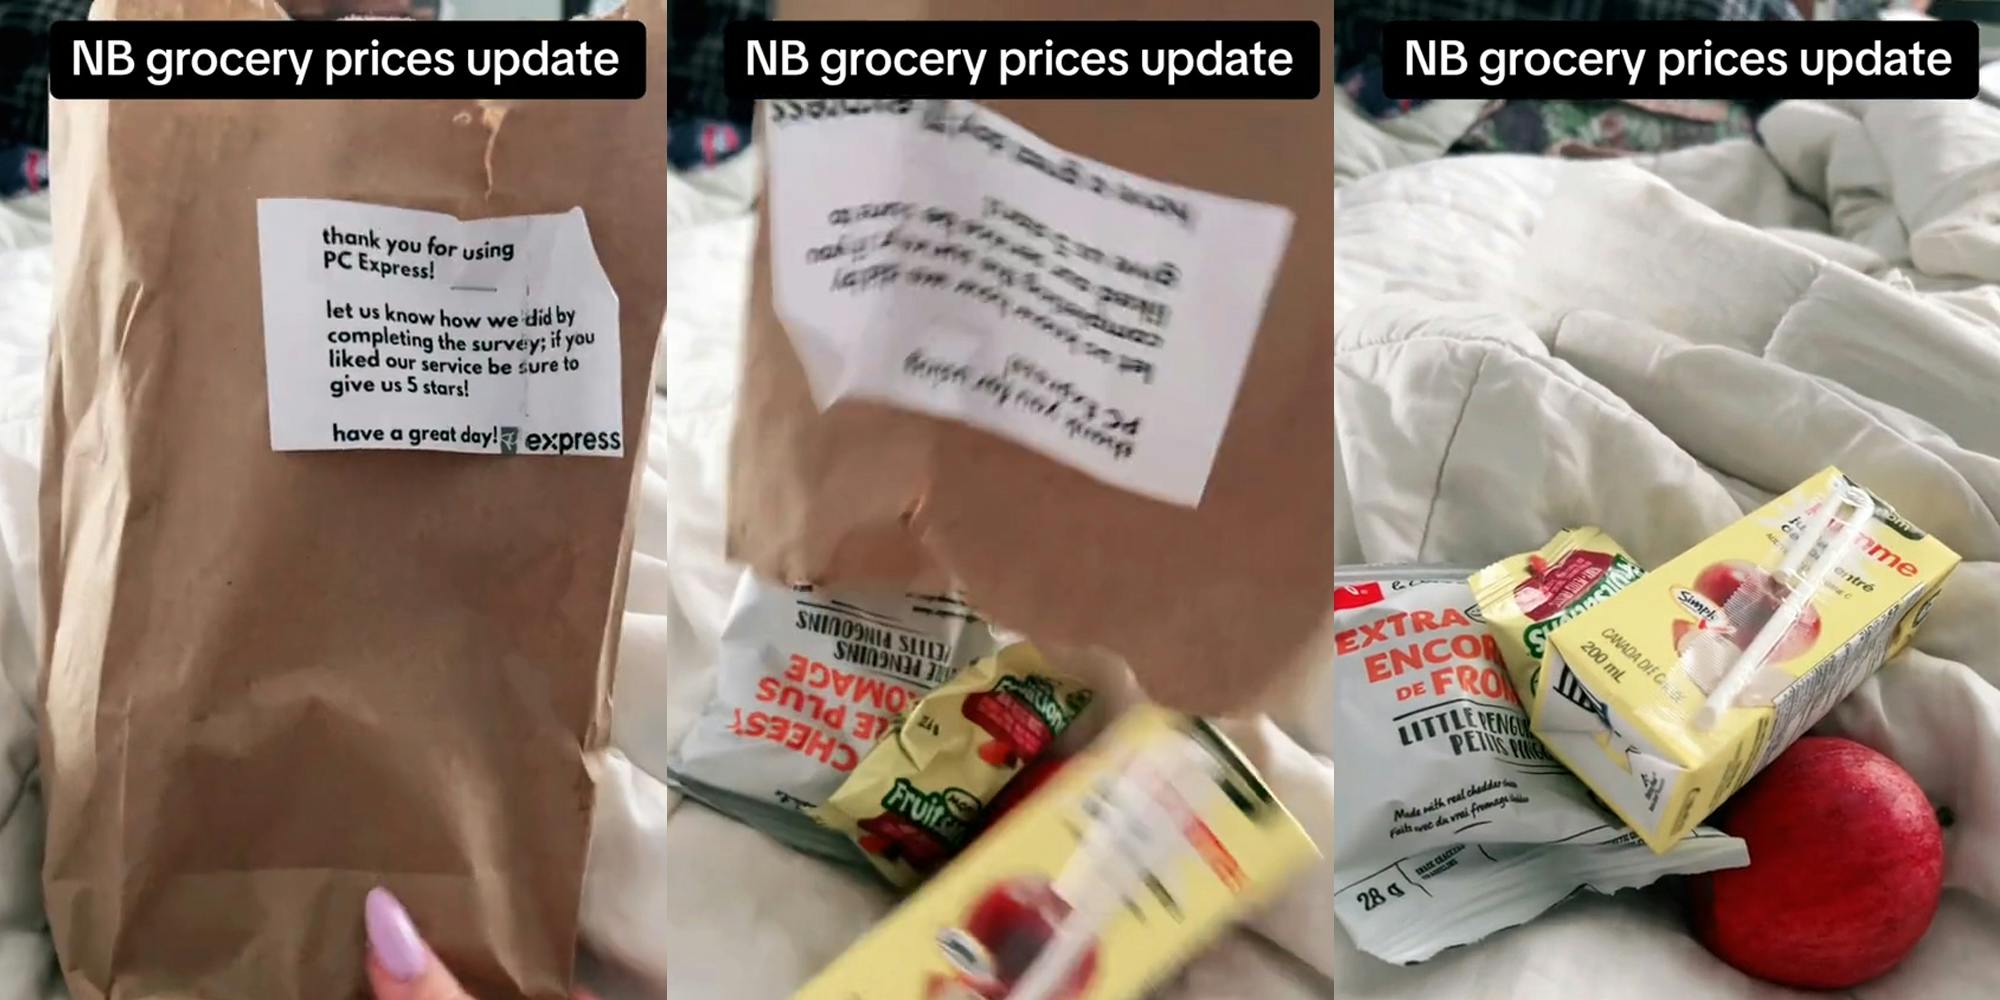 packed lunch in bag with caption "NB grocery prices update" (l) packed lunch items falling out of bag with caption "NB grocery prices update" (c) lunch items on bed with caption "NB grocery prices update" (r)